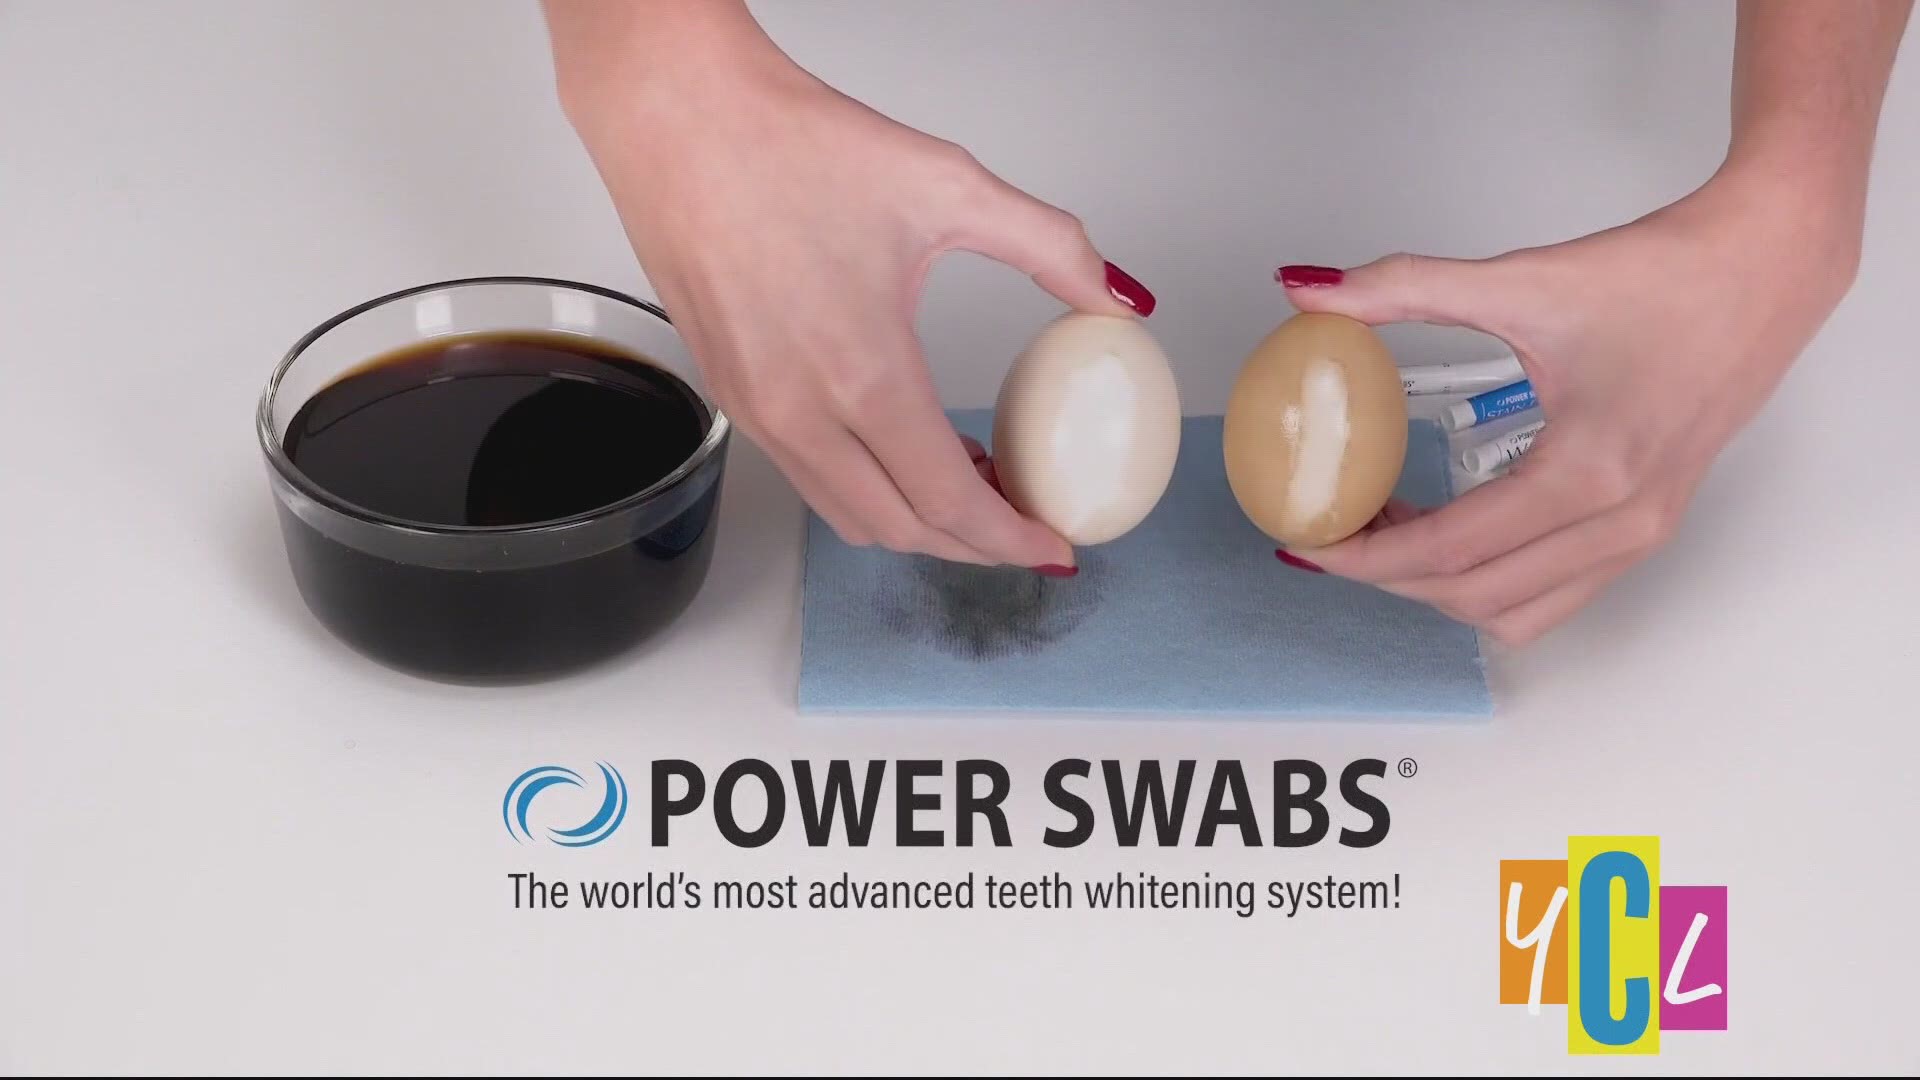 Learn how to Power Swabs can help you achieve that white smile you’ve always wanted. The following is a paid segment sponsored by True Earth Health Solutions.